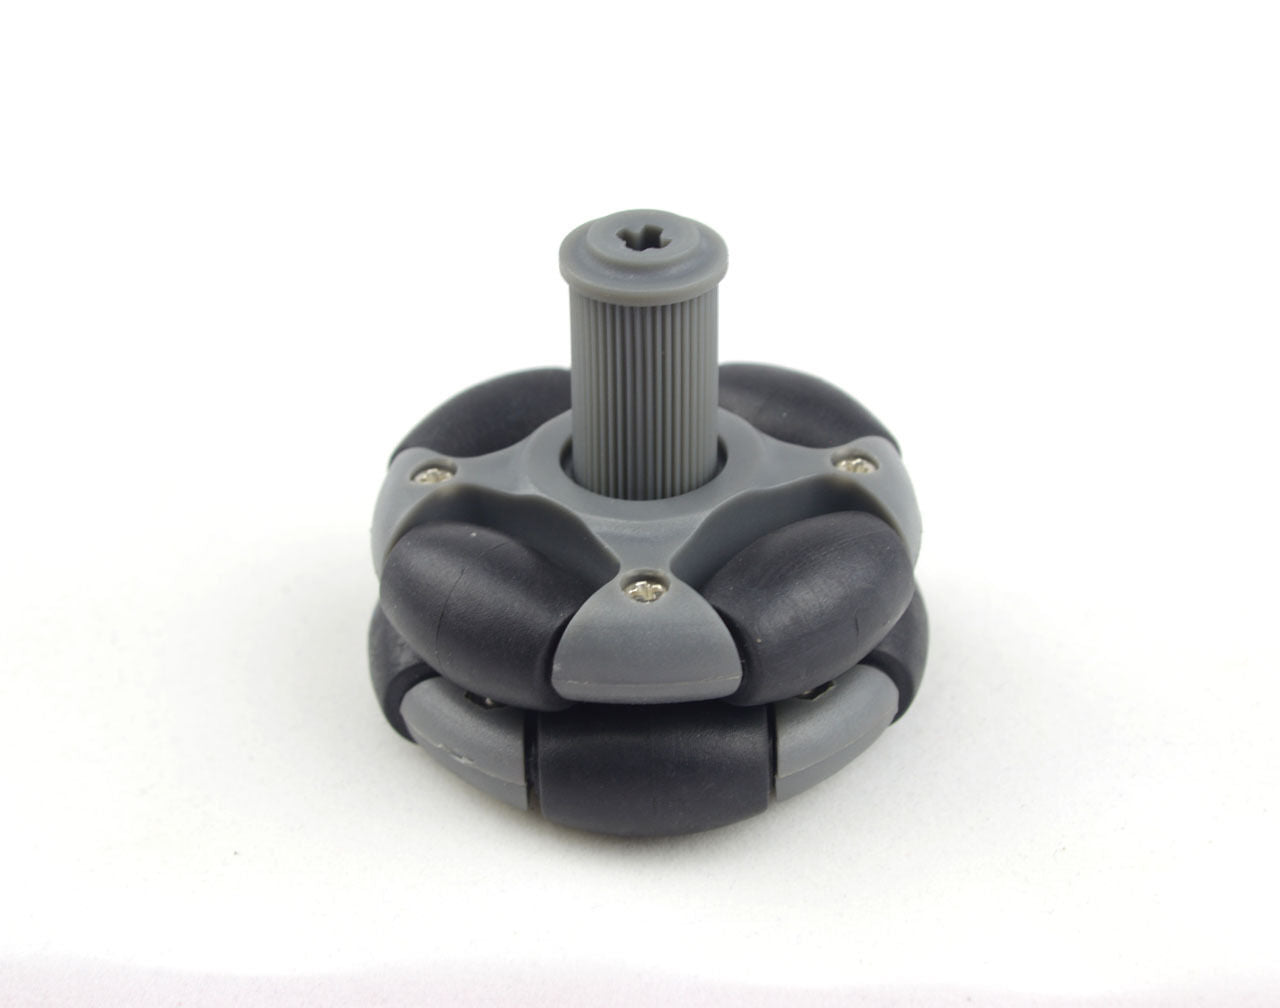 48mm Omni Wheel With Hub For DIY Arduino Robot Competition Supporting LEGO